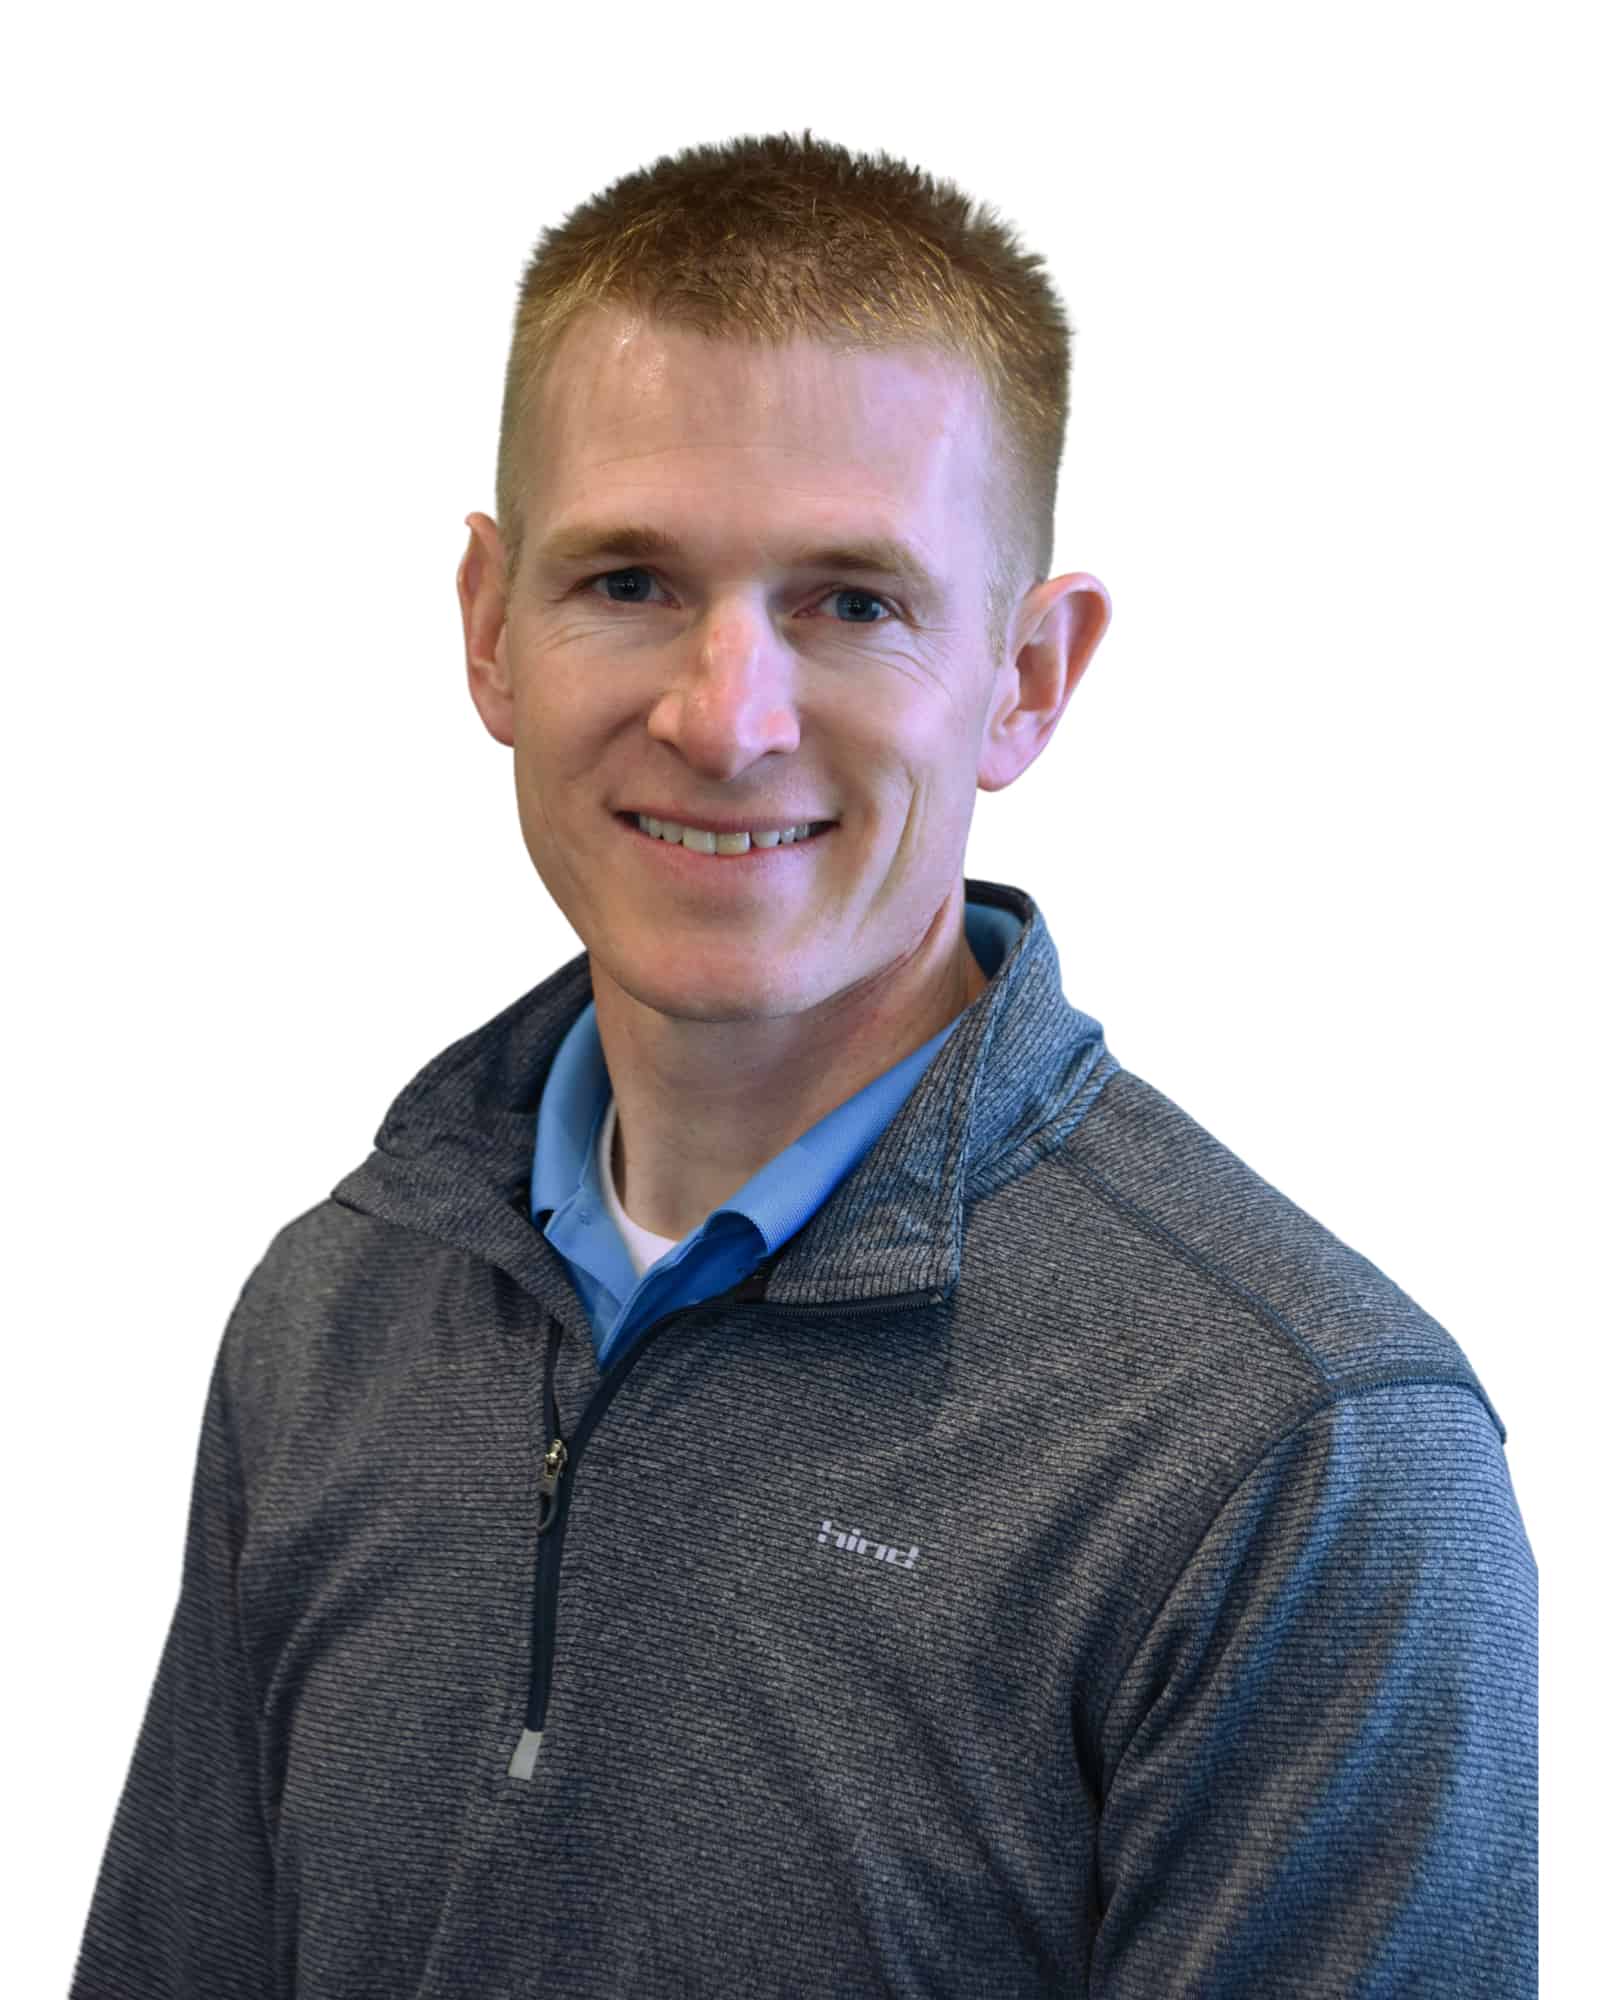 jared mckee physical therapist